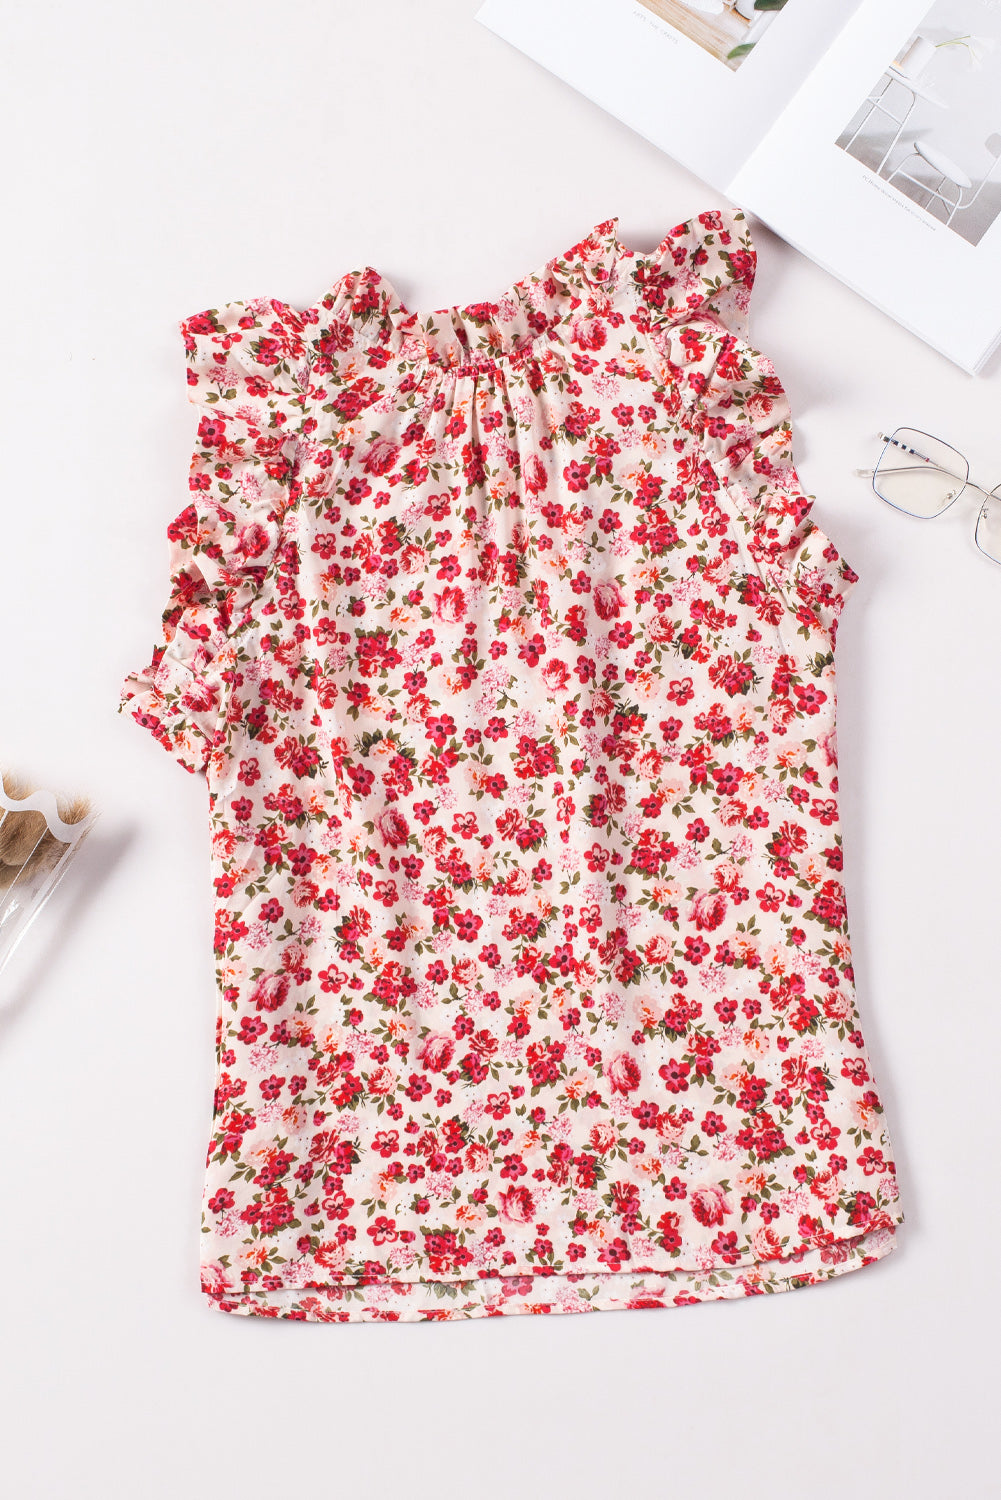 Red Floral Sleeveless Top